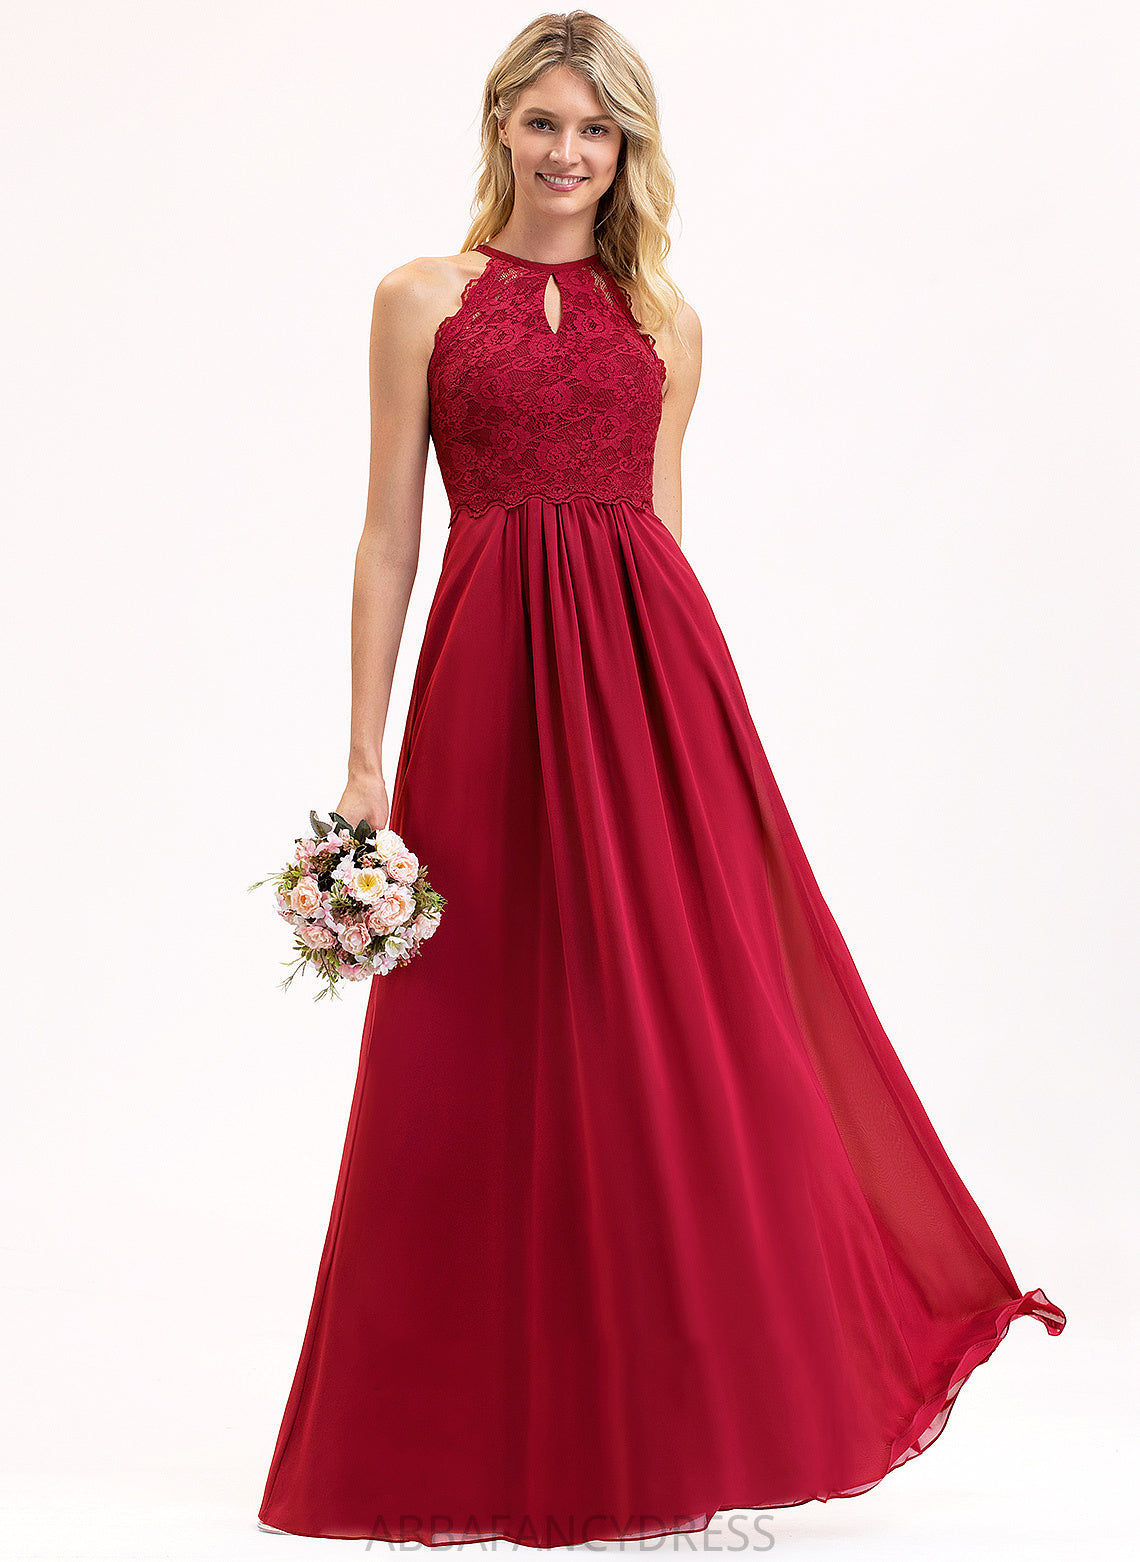 Silhouette Floor-Length Straps Fabric Lace Length A-Line Neckline ScoopNeck Brynlee Sleeveless Spaghetti Staps